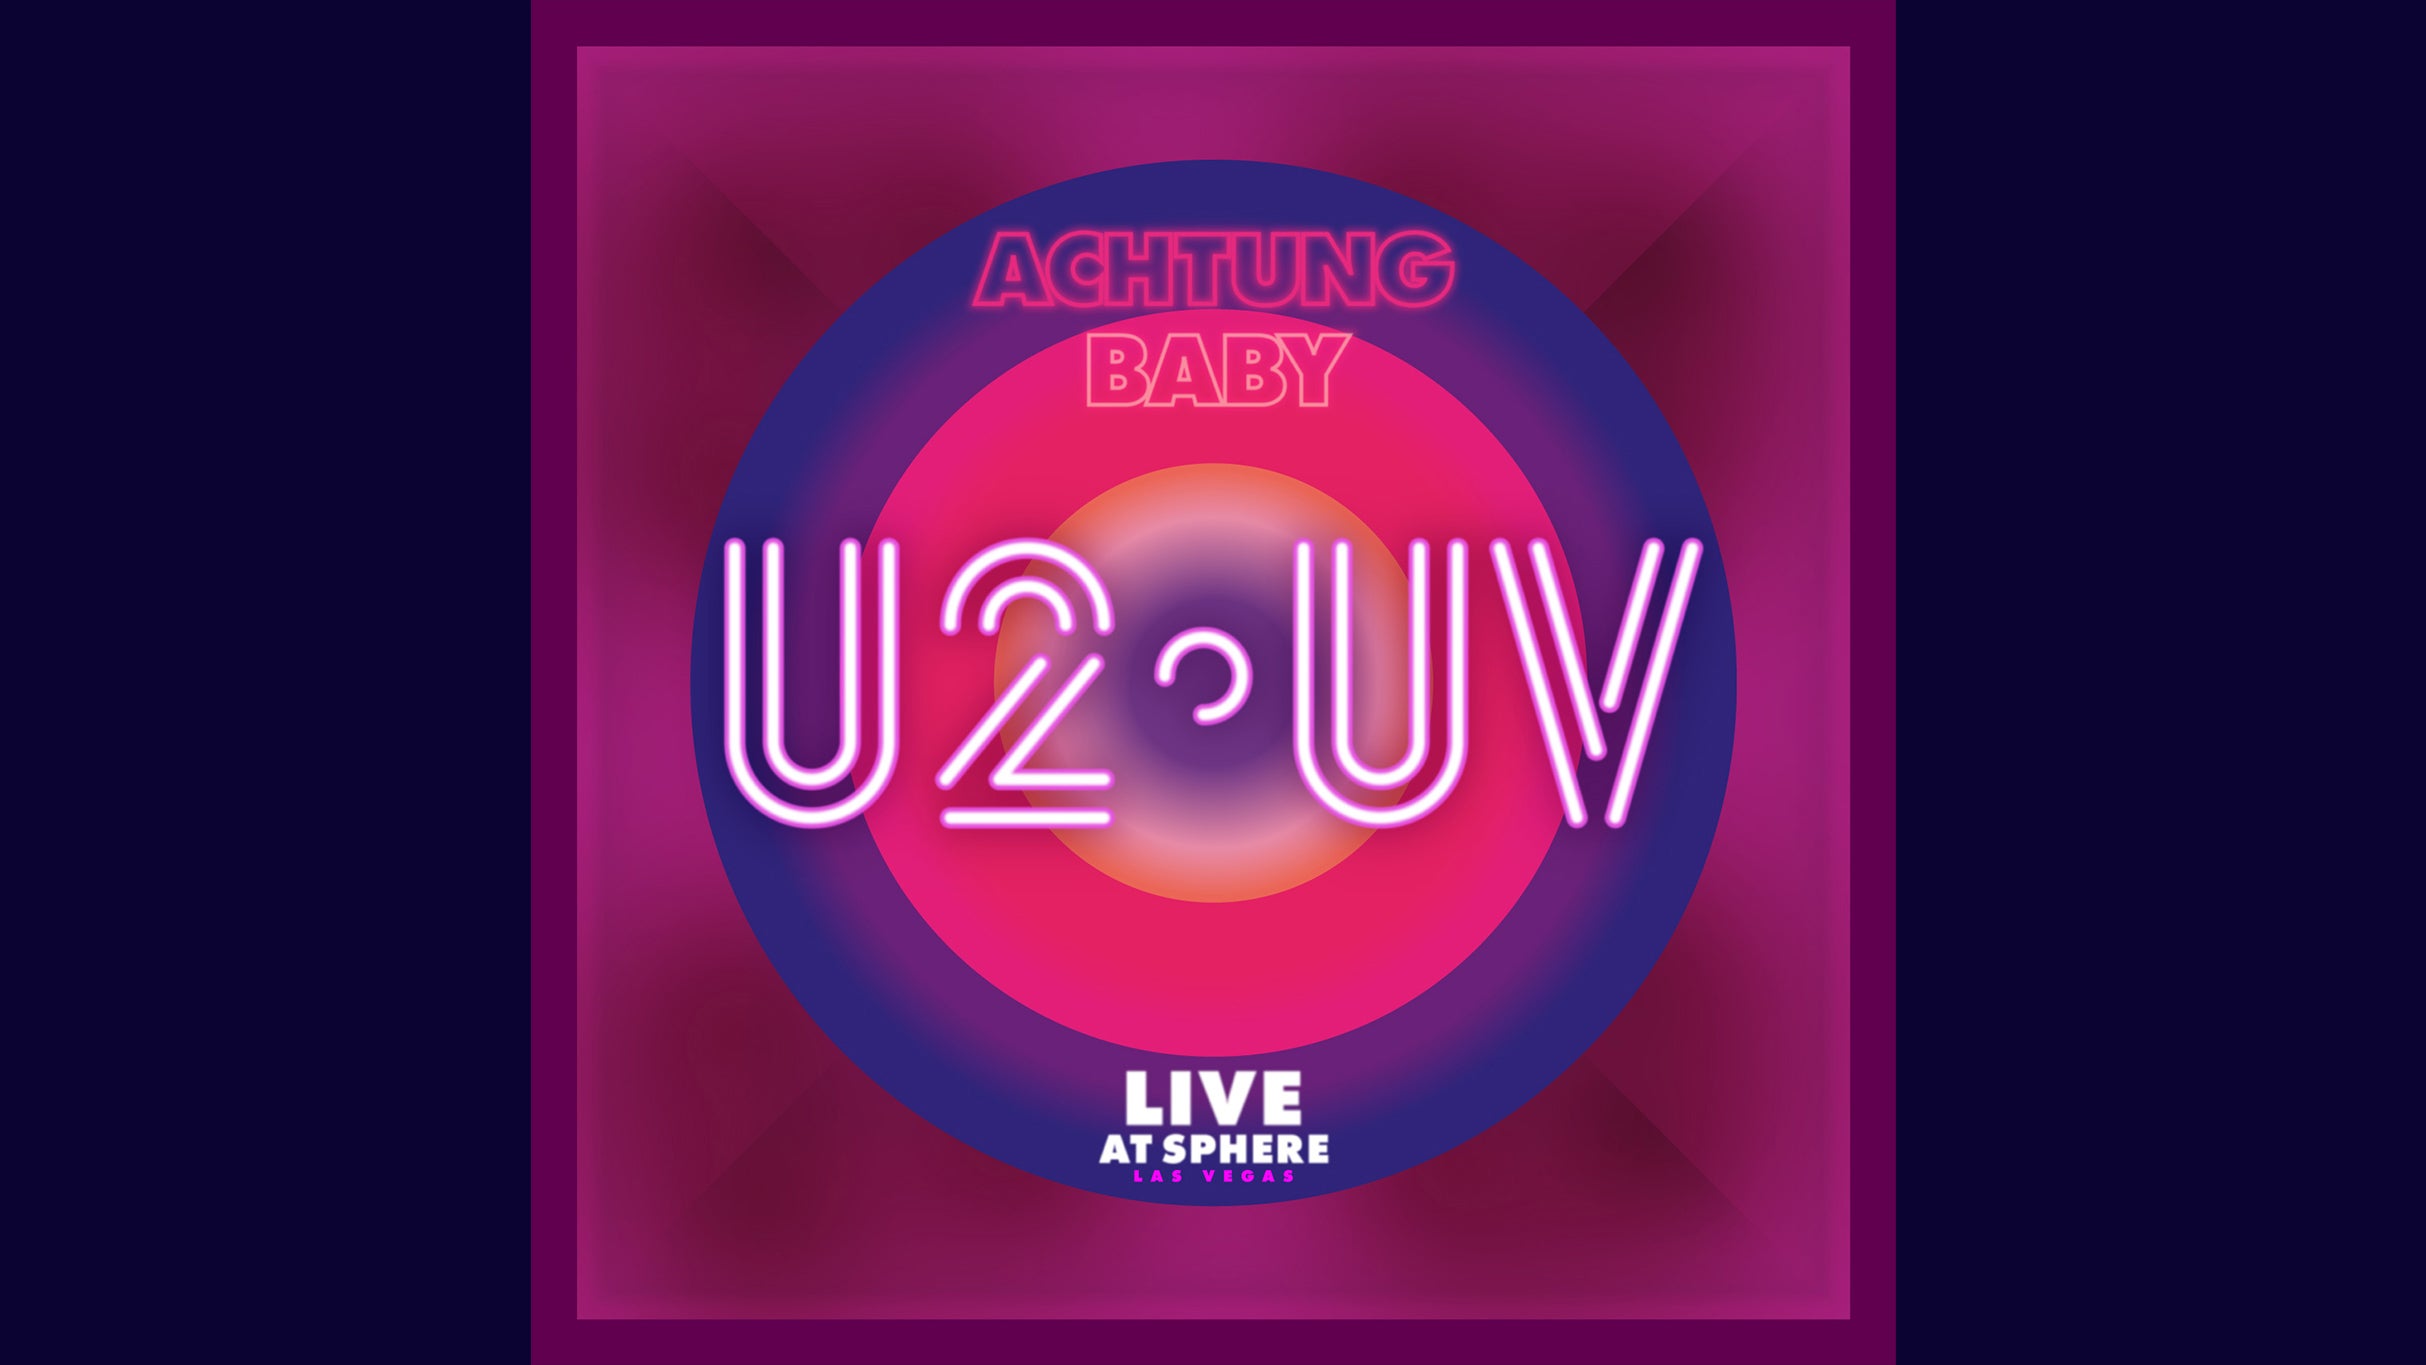 U2:UV Achtung Baby Live At Sphere - Reserved Seating in Las Vegas event information